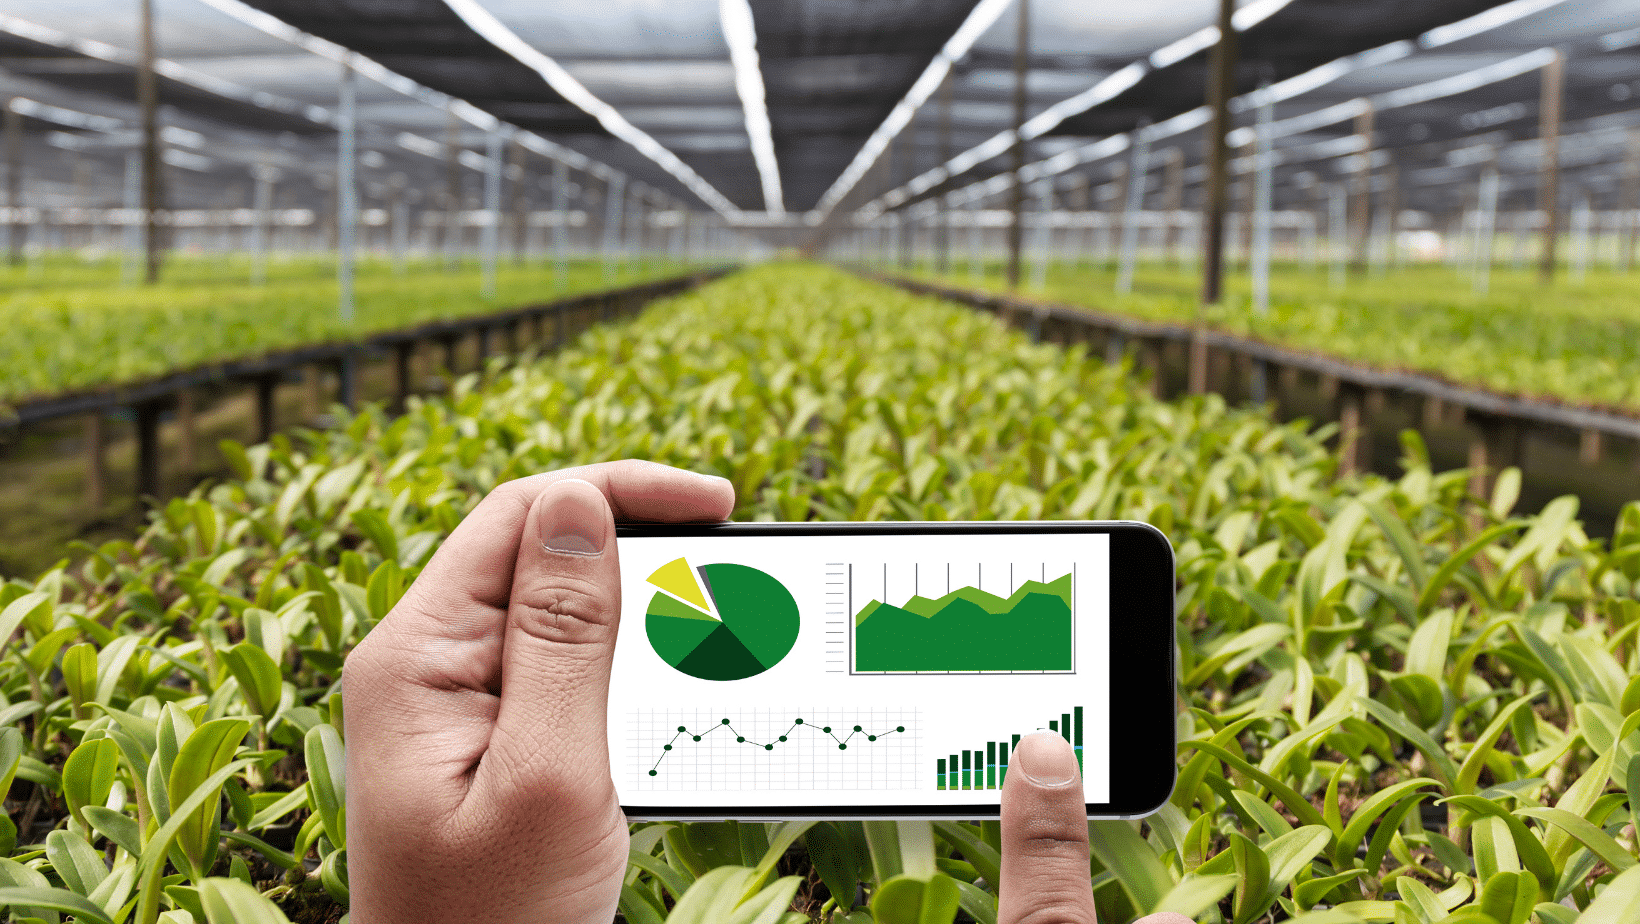 A person holding a smartphone with graphs on it in a greenhouse.